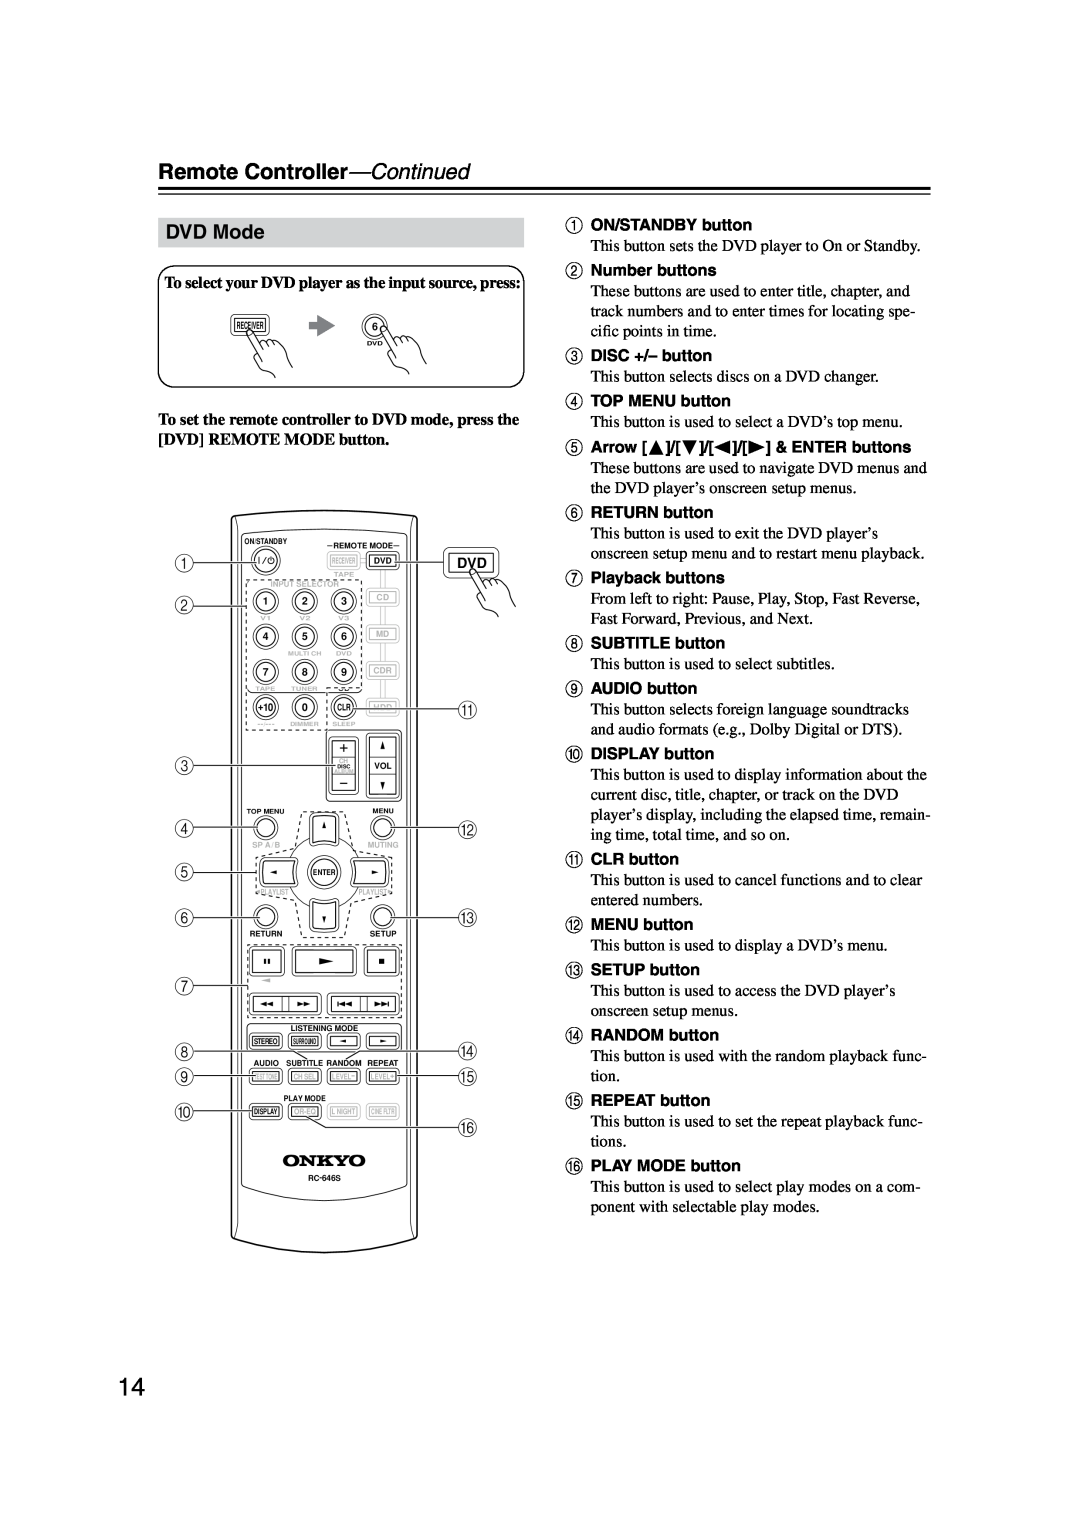 Onkyo HT-S590 instruction manual DVD Mode, 5 6 7 8 9 J, Remote Controller-Continued 